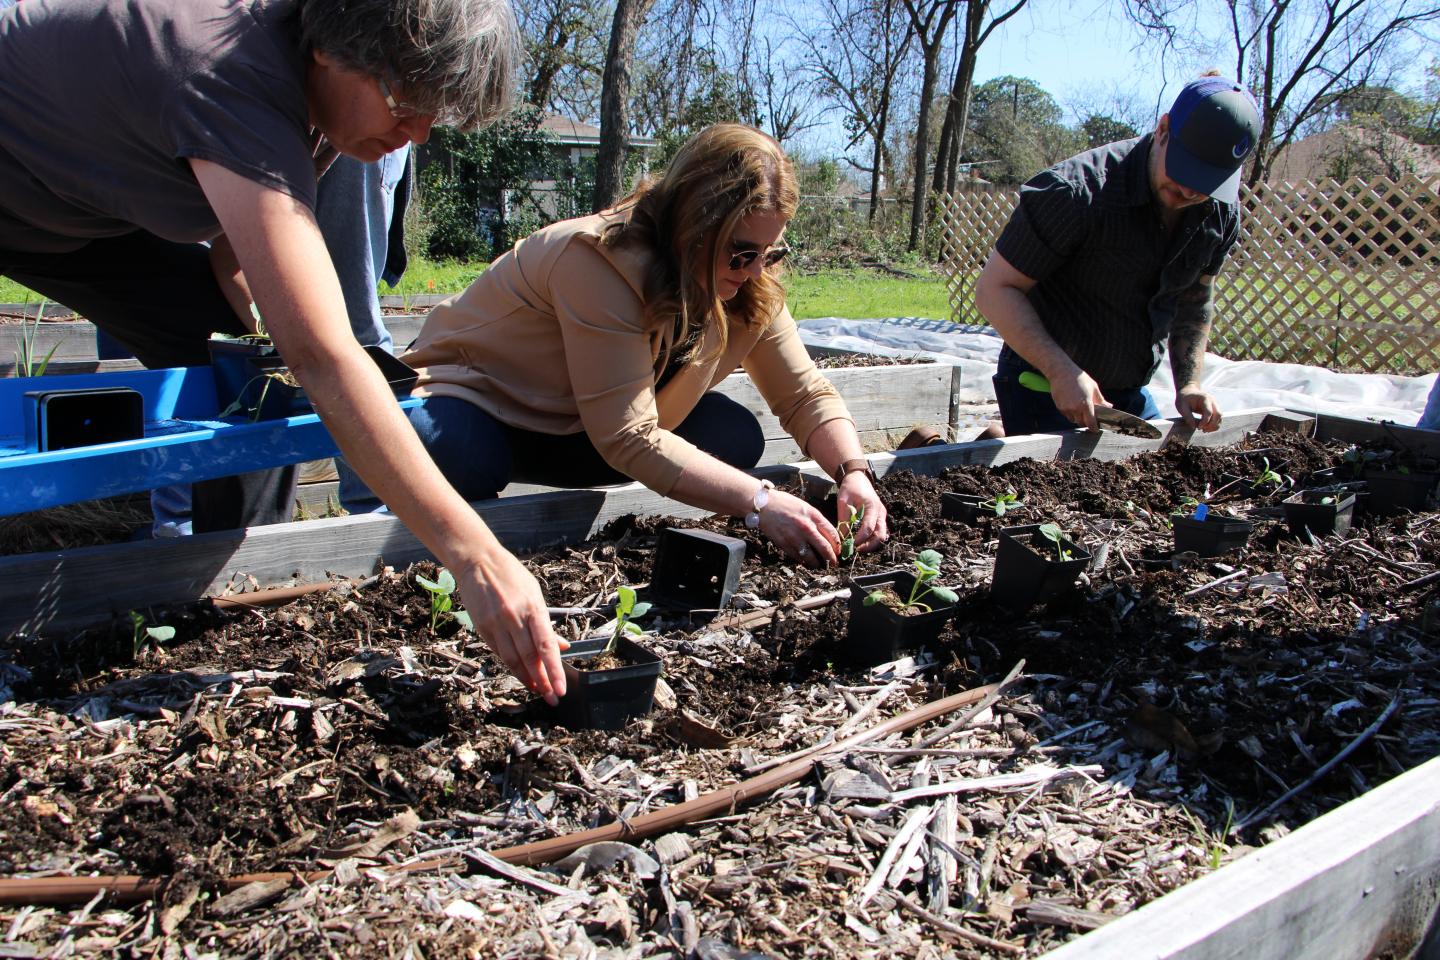 People planting plants in a raised garden bed